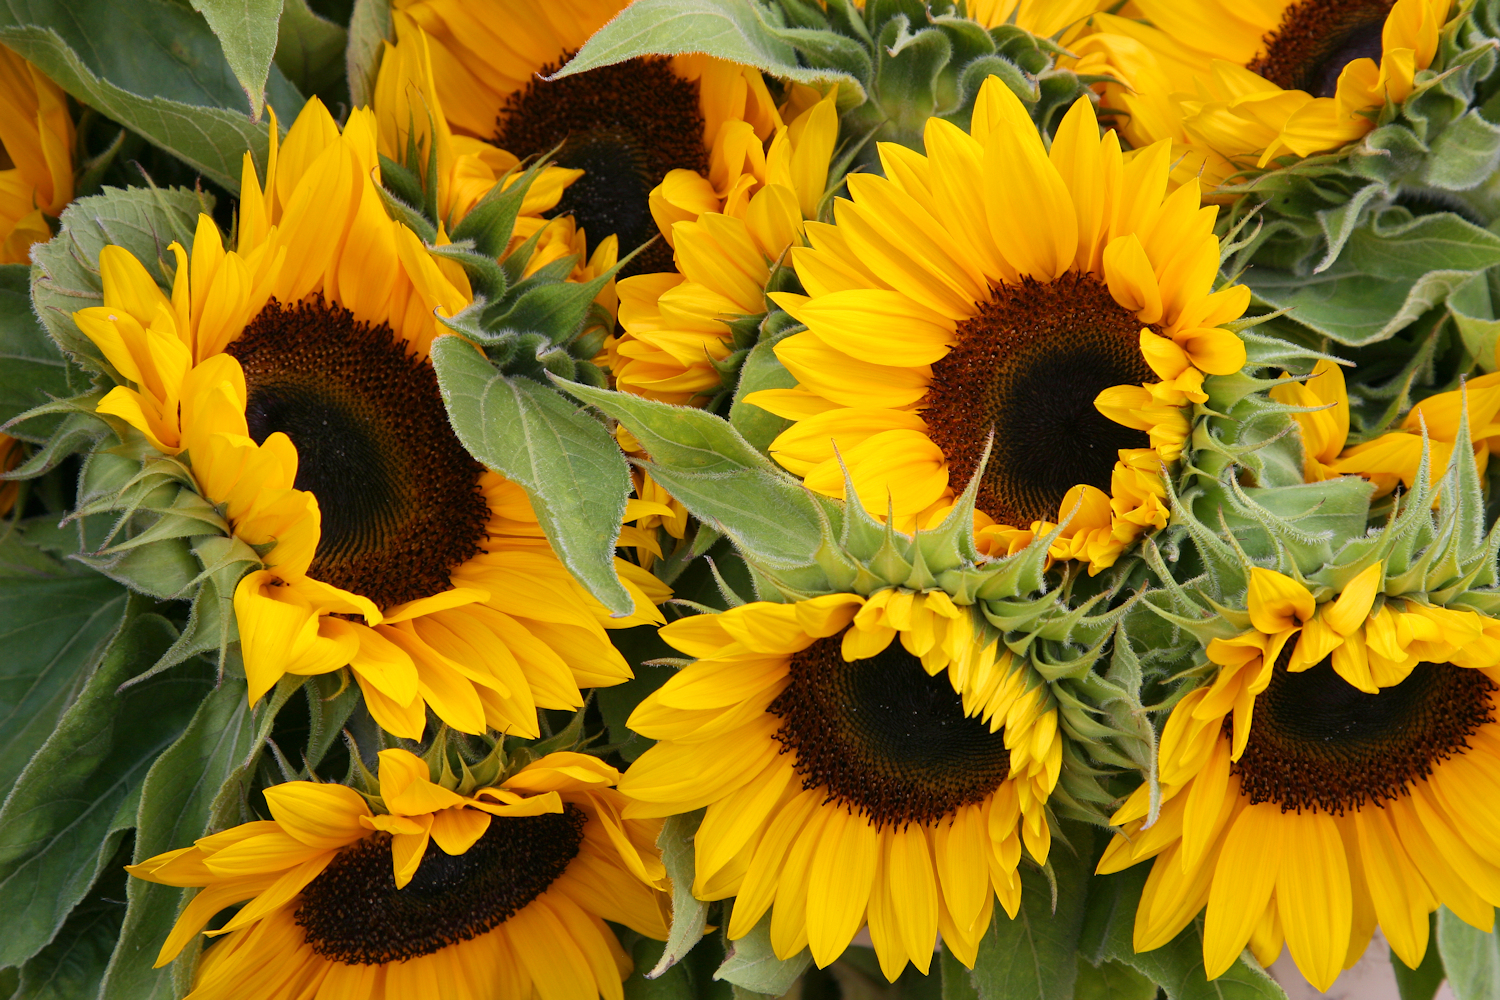 No cutting garden is complete without Sunflowers